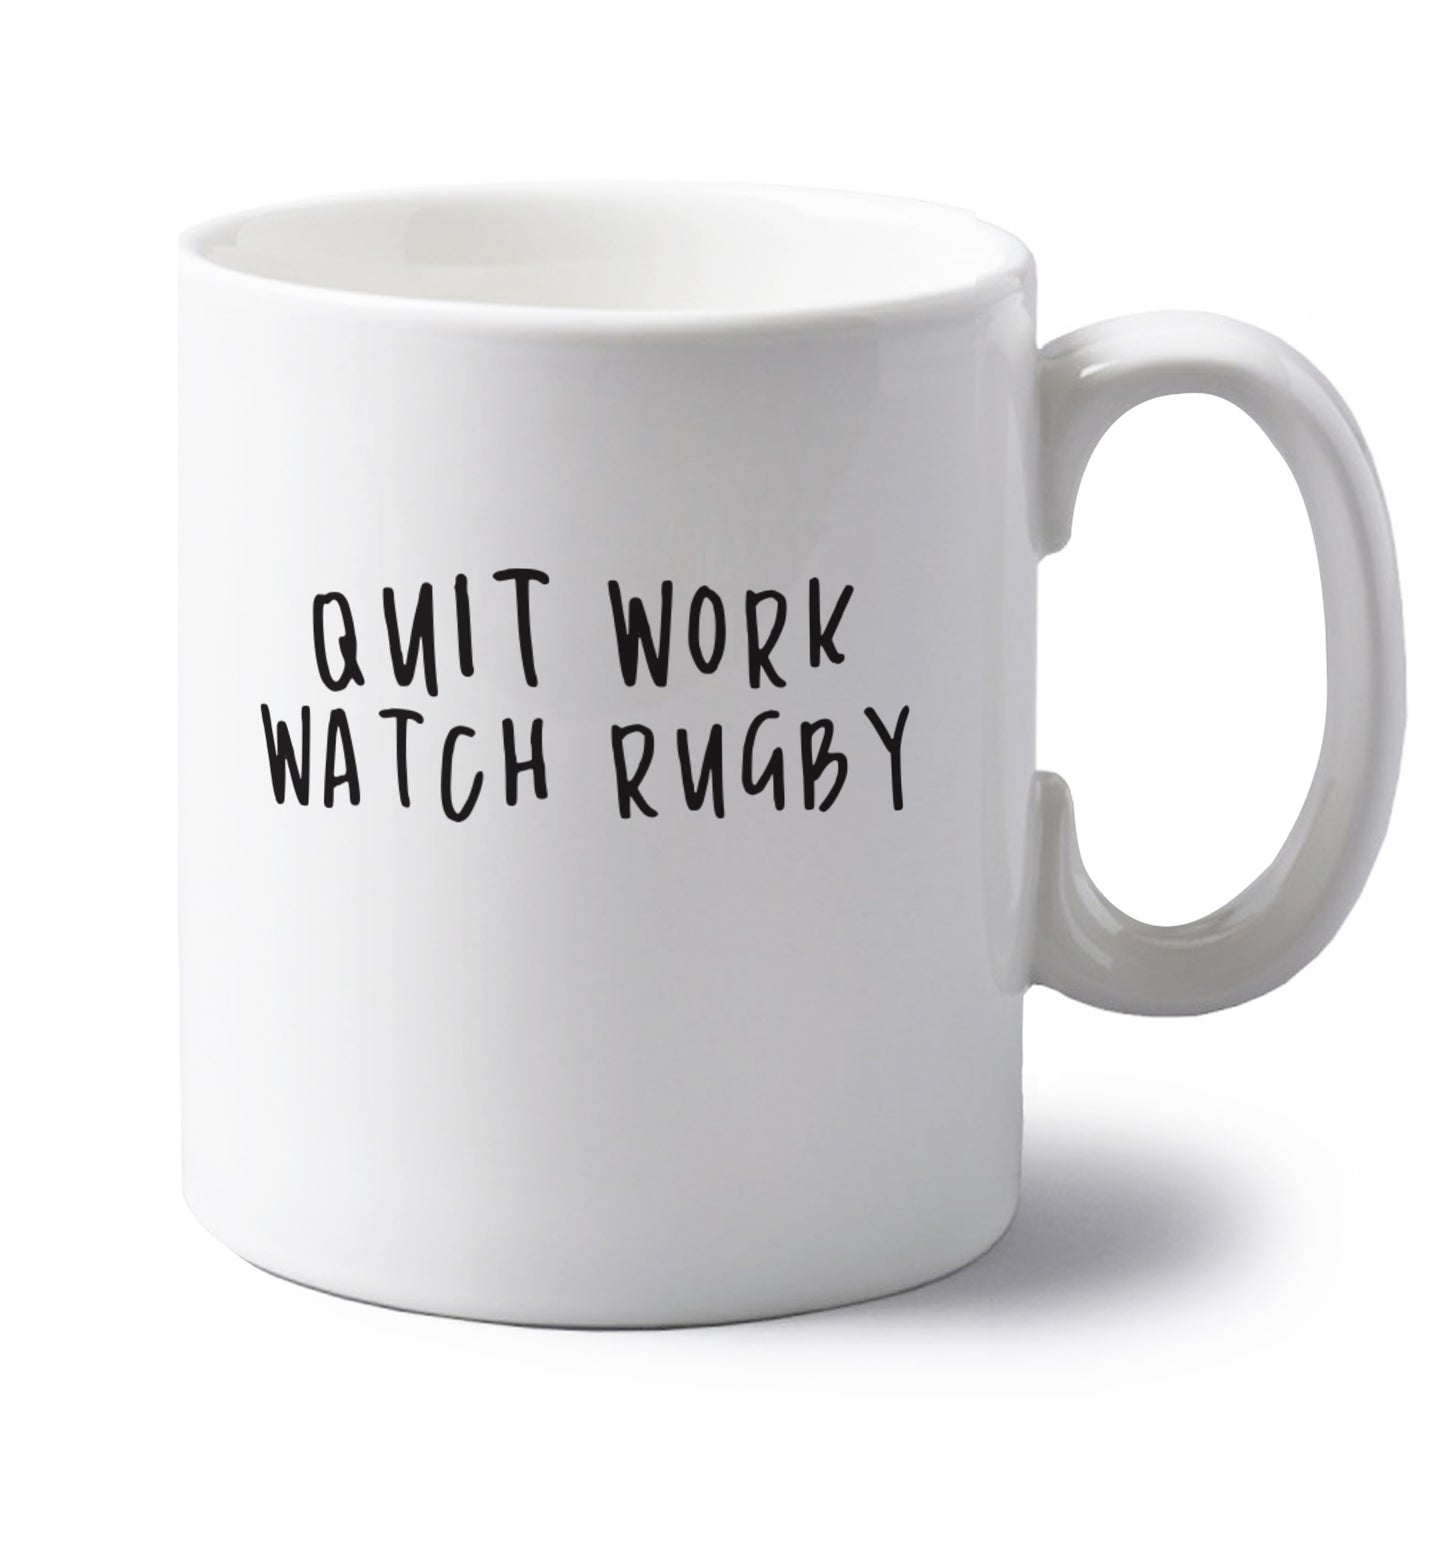 Quit work watch rugby left handed white ceramic mug 